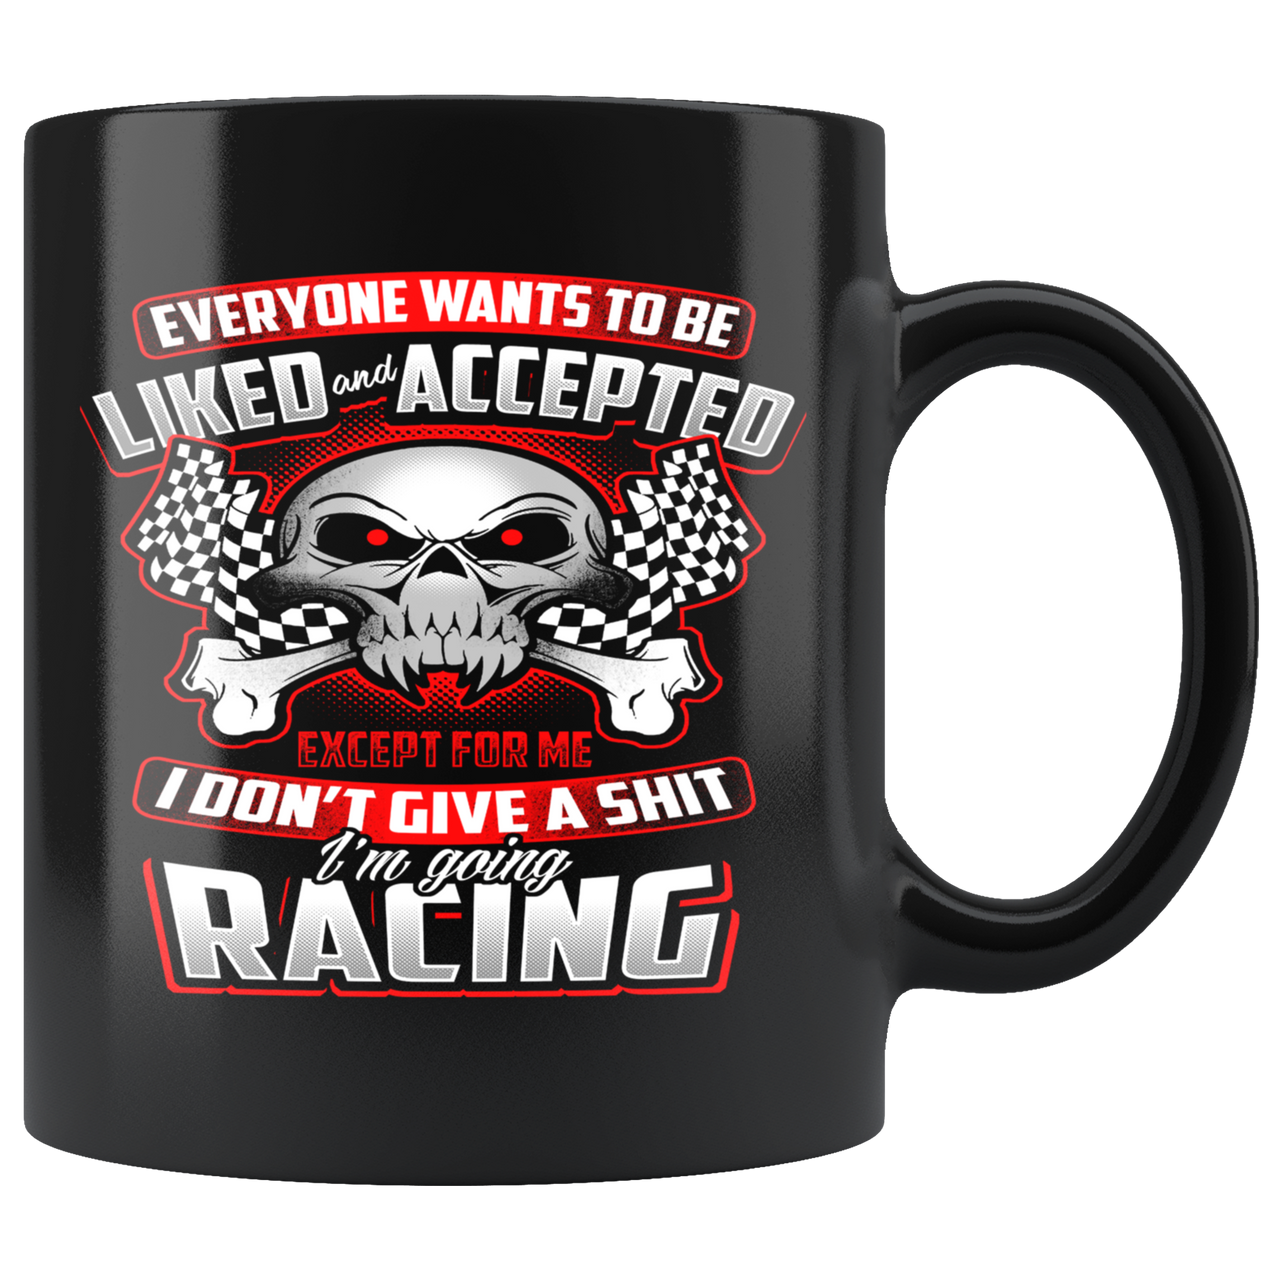 Everyone Wants To Be Liked Or Accepted Except Me I don't Give A Sh$t I'm Going Racing Mug!